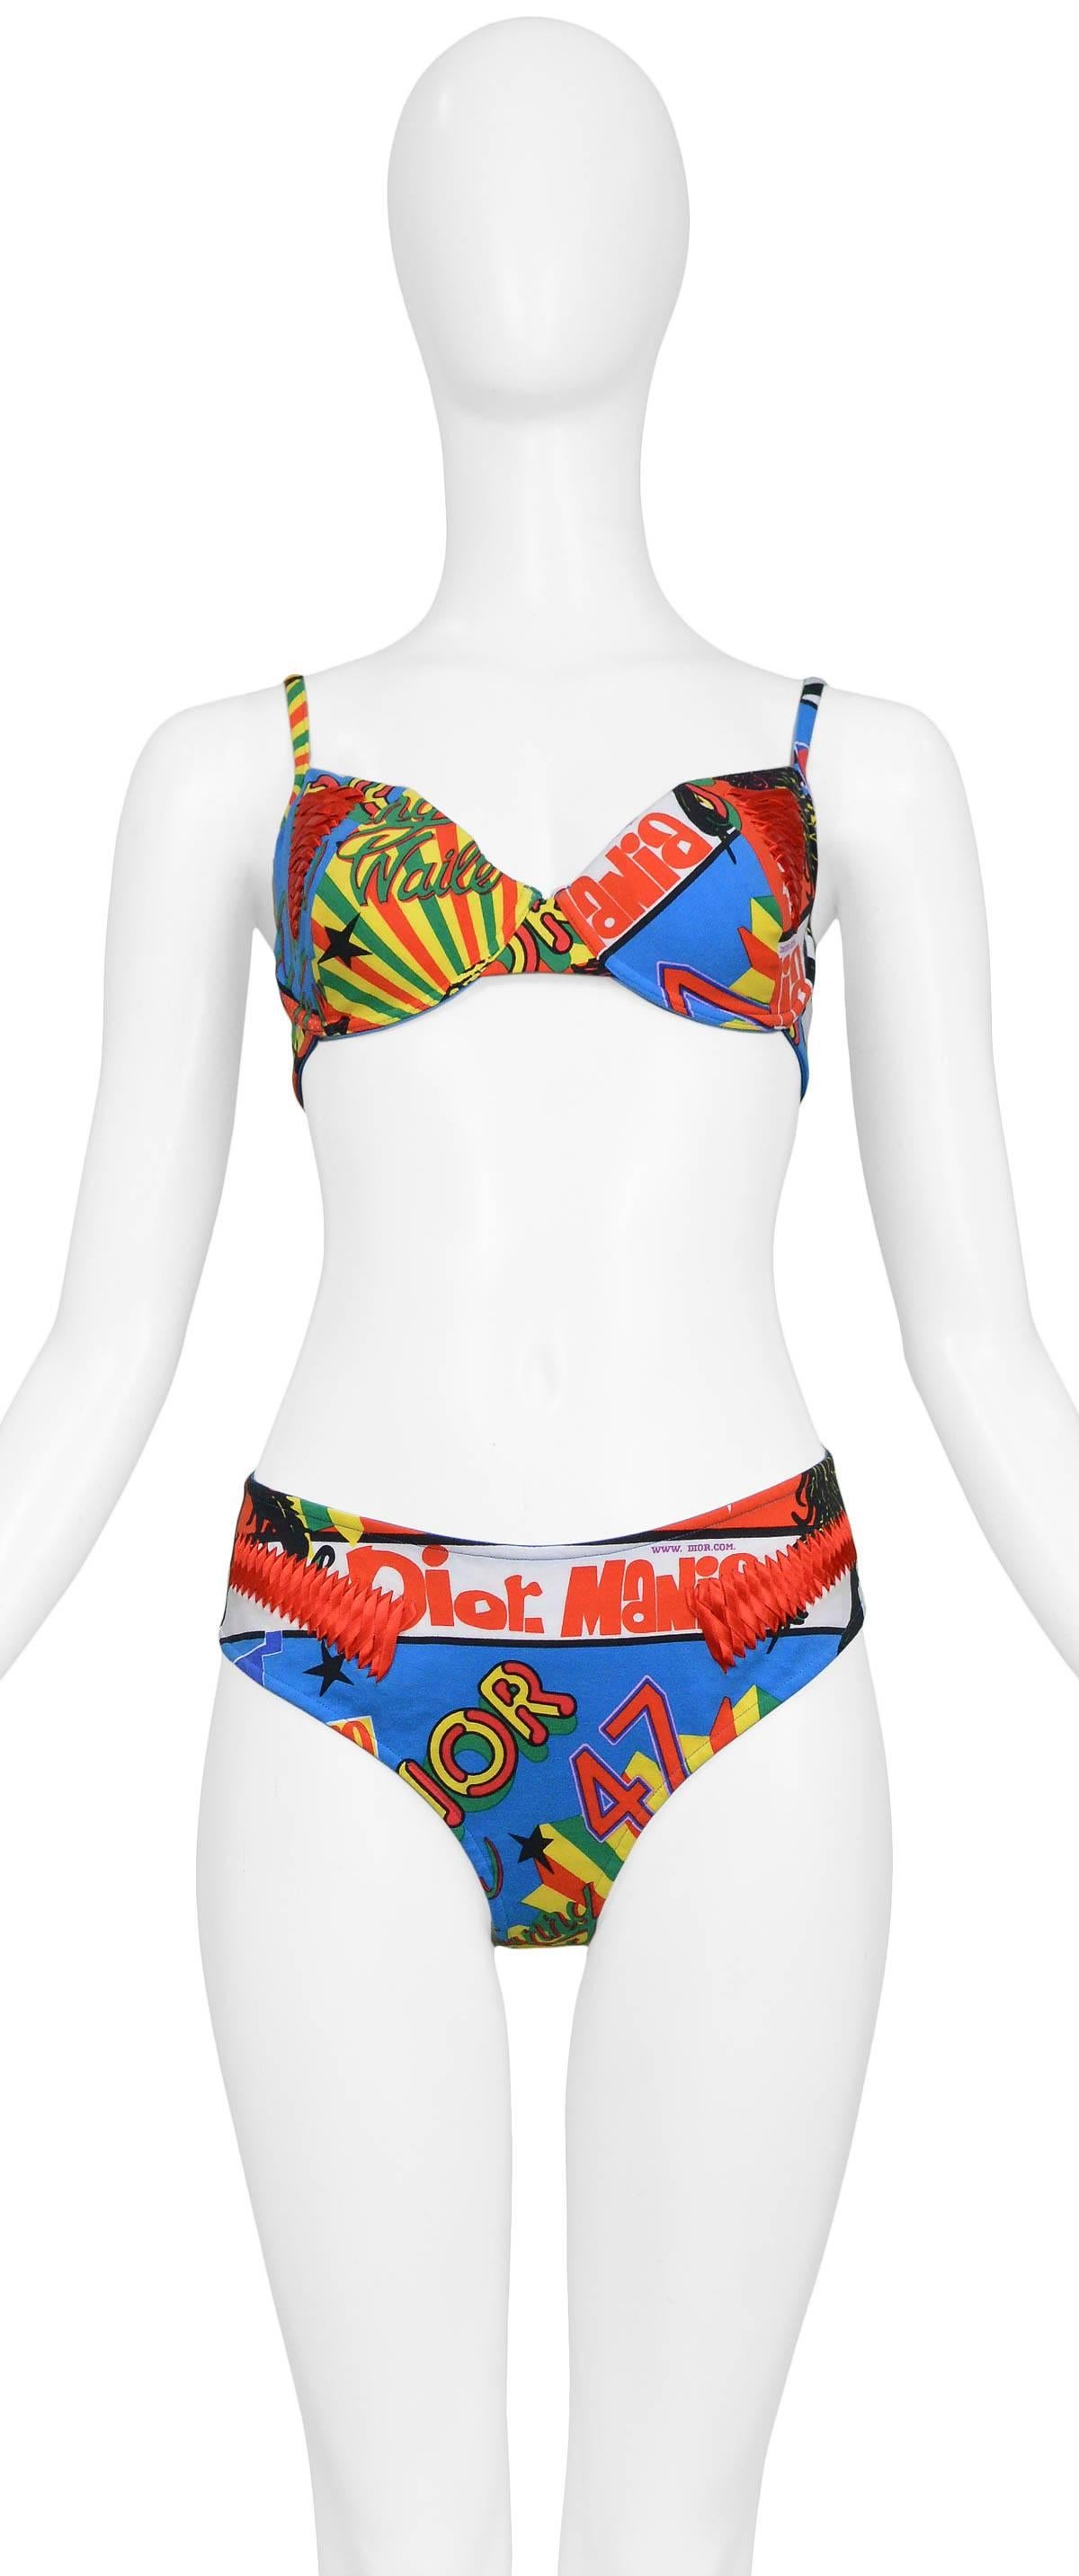 Christian Dior by John Galliano cotton thong & bra ligerie set with all-over reggae print and ribbon detail. This set has never been worn & is deadstock vintage from the 2003 Collection. 

Never been worn. Excellent & Brand New Condition. 

Size: